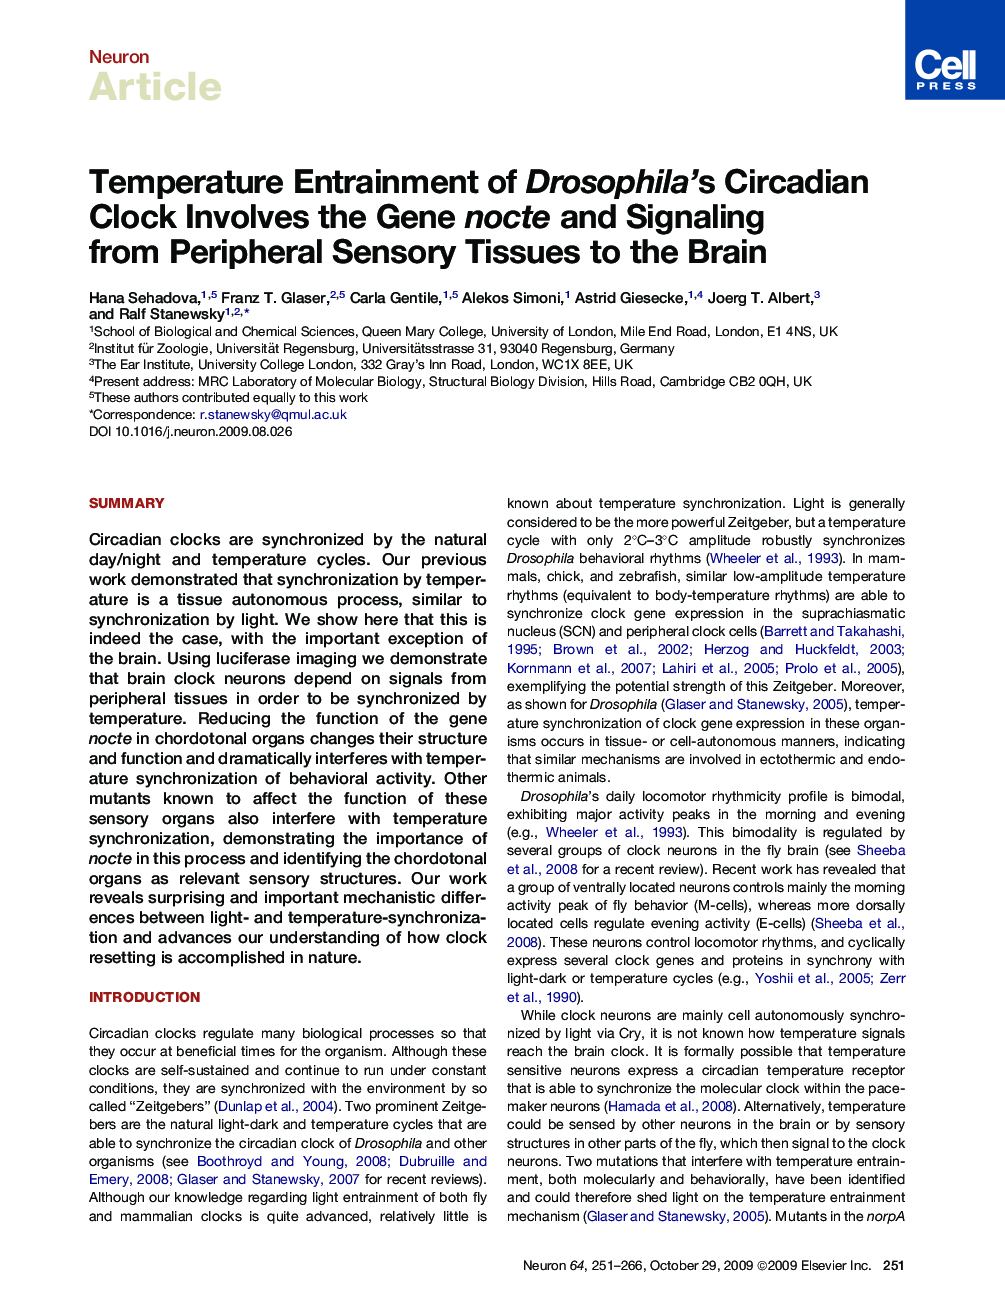 Temperature Entrainment of Drosophila's Circadian Clock Involves the Gene nocte and Signaling from Peripheral Sensory Tissues to the Brain